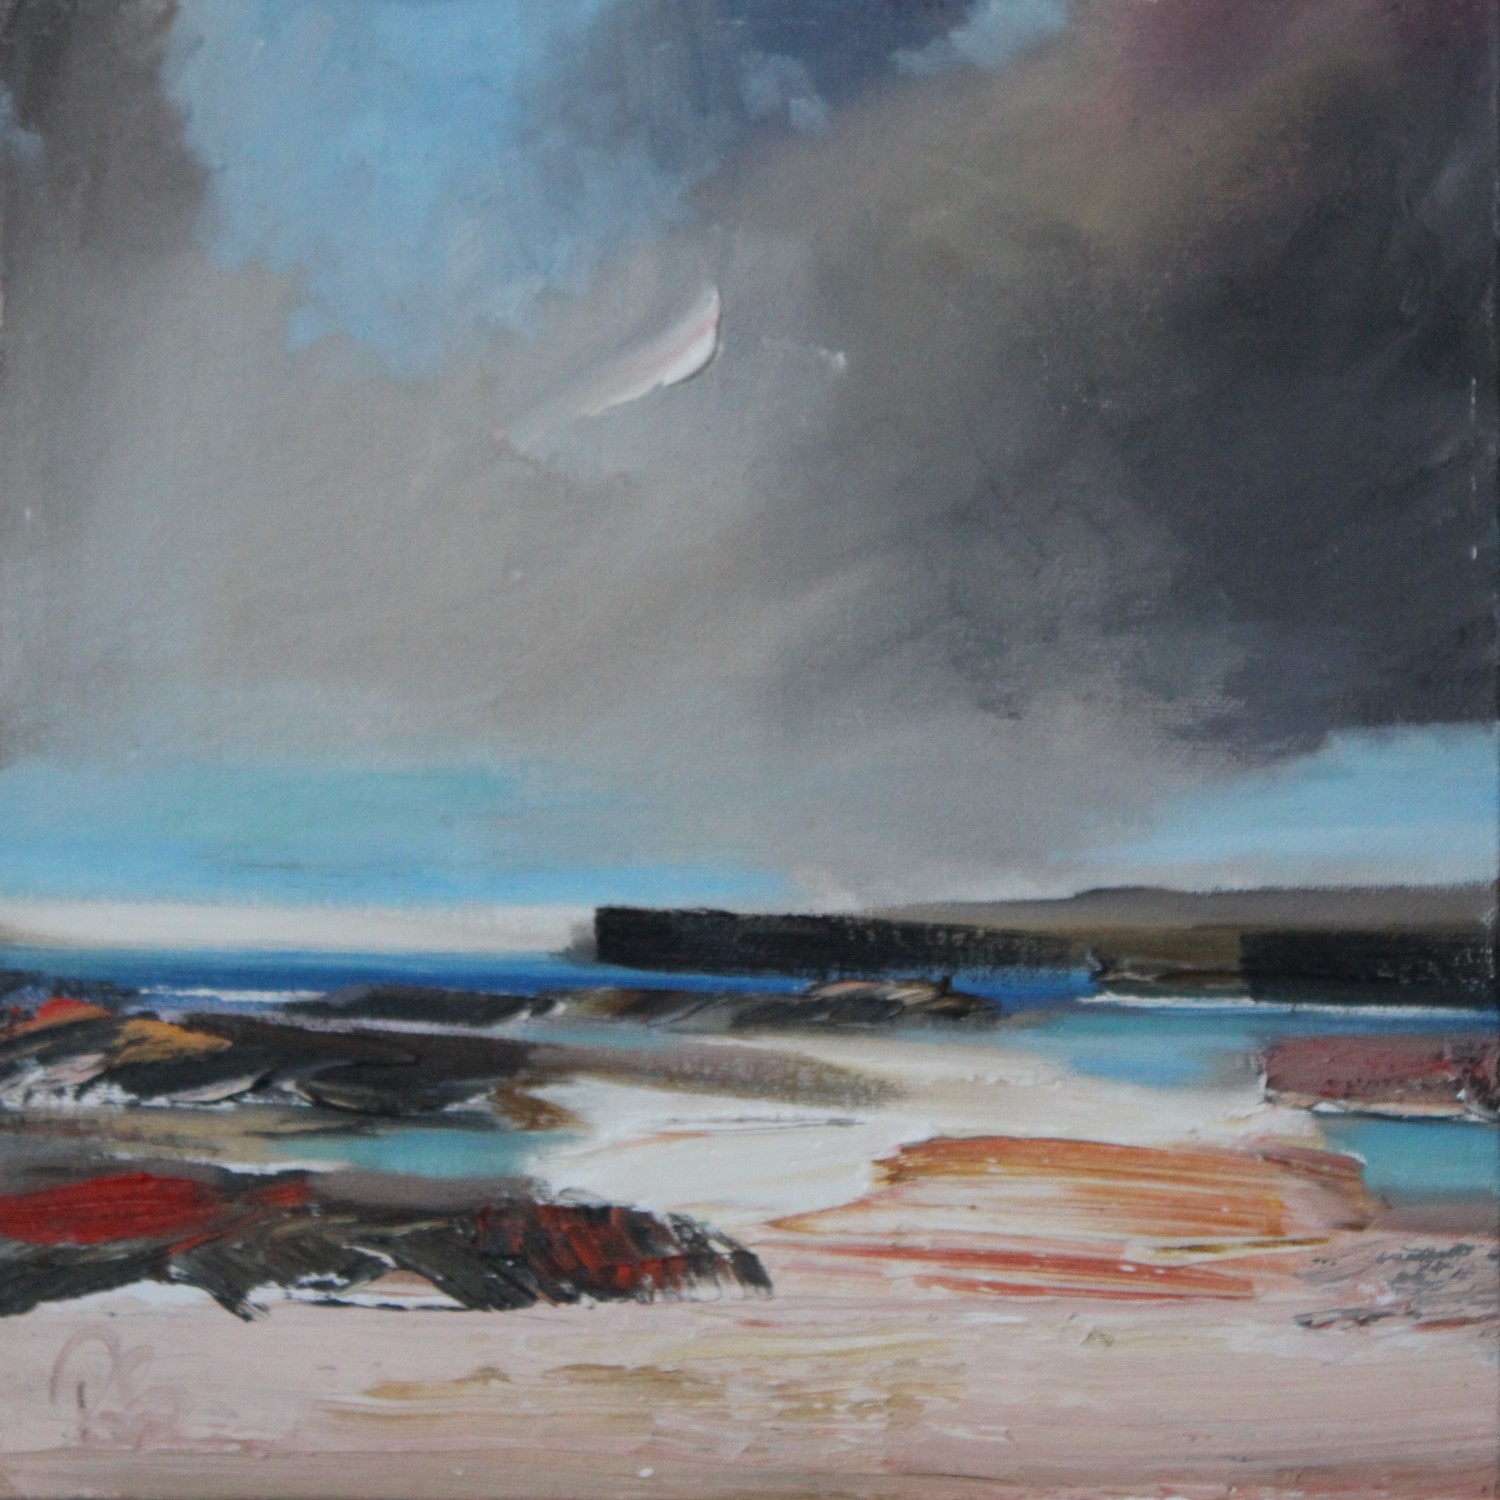 'Heading to the Rock Pools' by artist Rosanne Barr